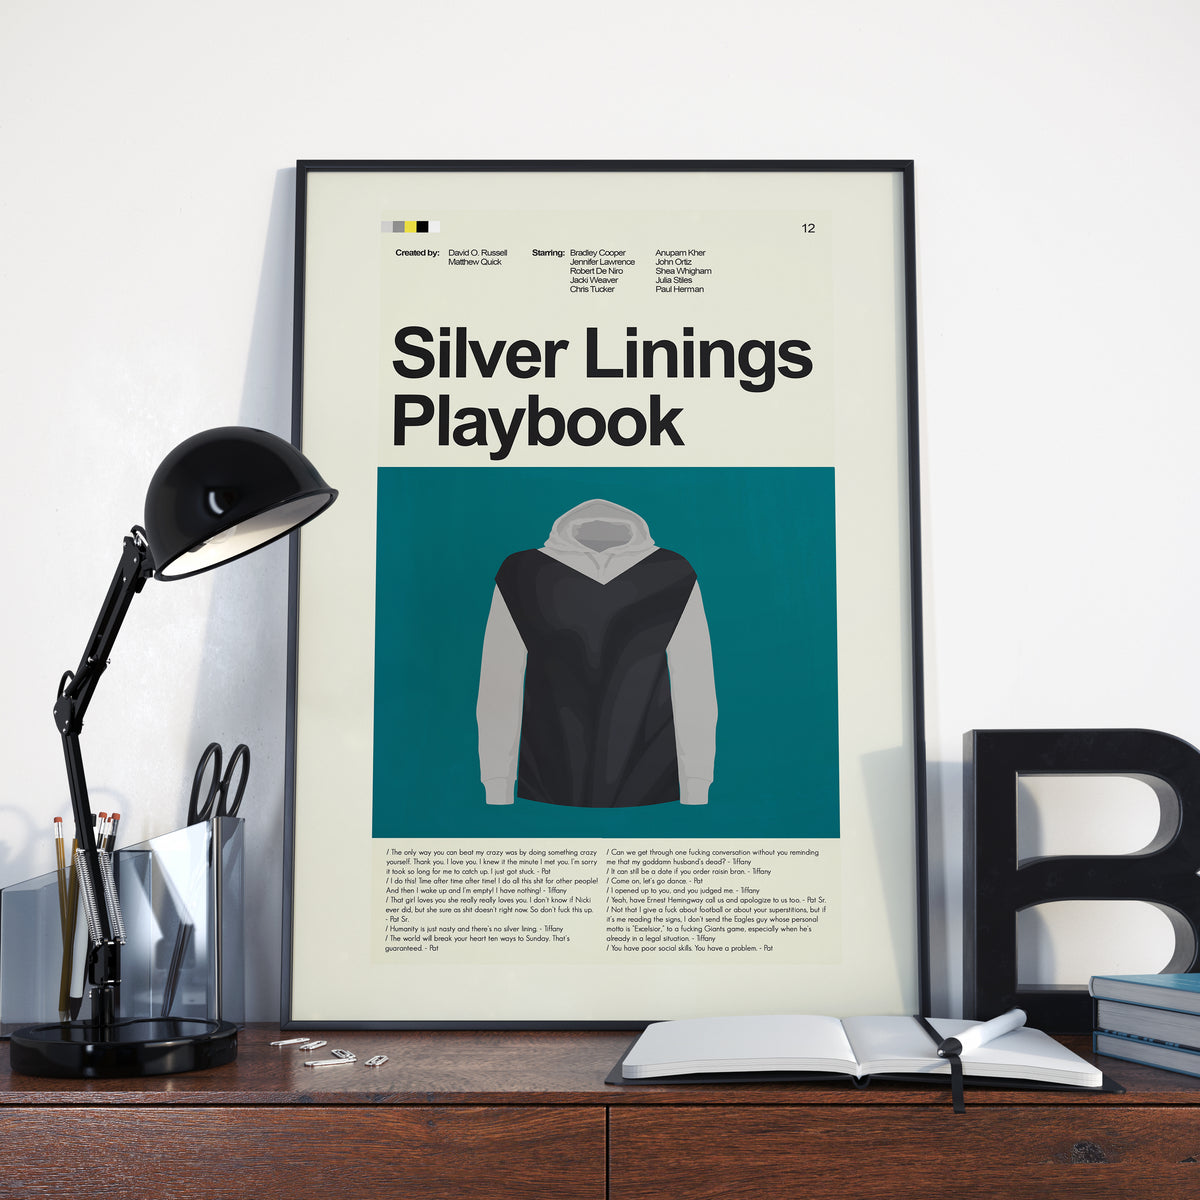 Silver Linings Playbook - Trash Bag Poncho | 12"x18" or 18"x24" Print only